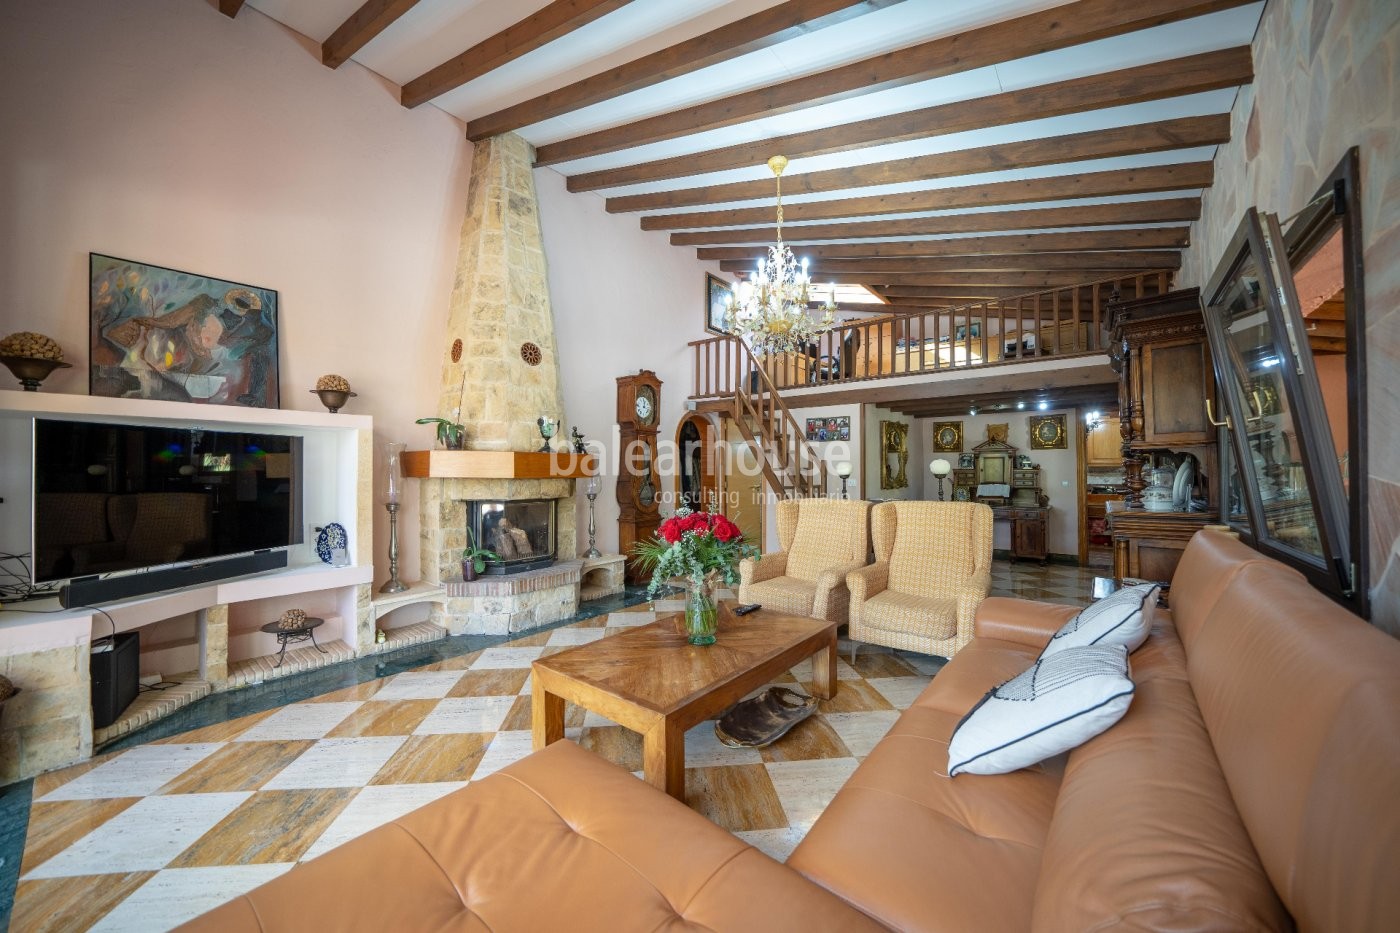 Excellent rustic finca with large garden and swimming pool at the foot of the Tramuntana mountains.